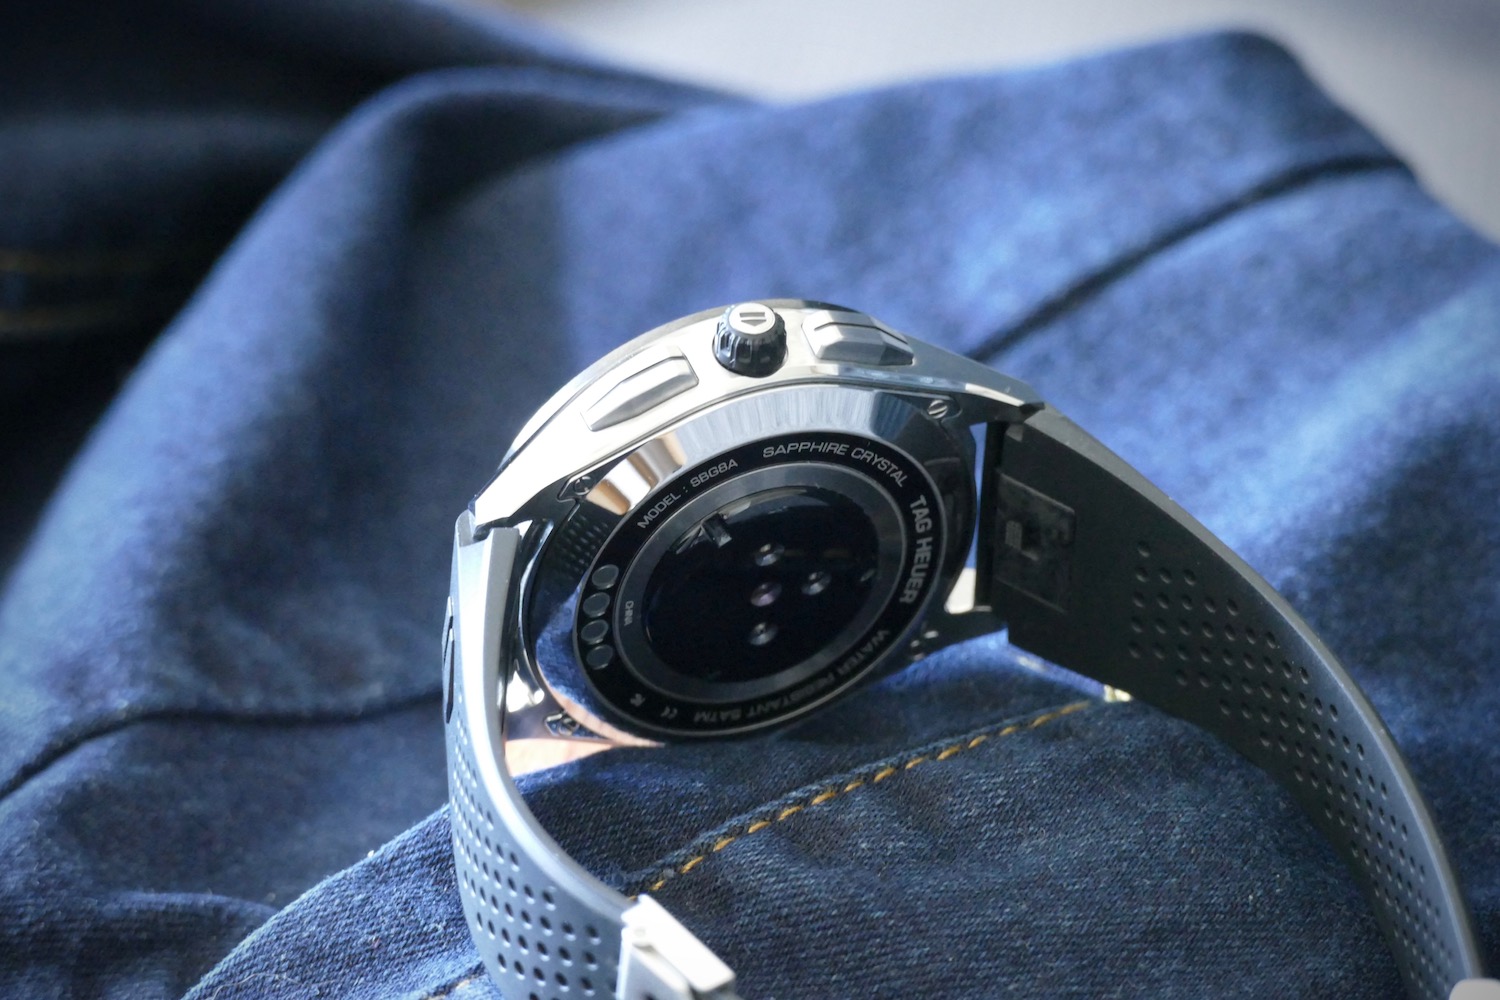 Tag Heuer Connected Review: Indulge Yourself, It's Worth It